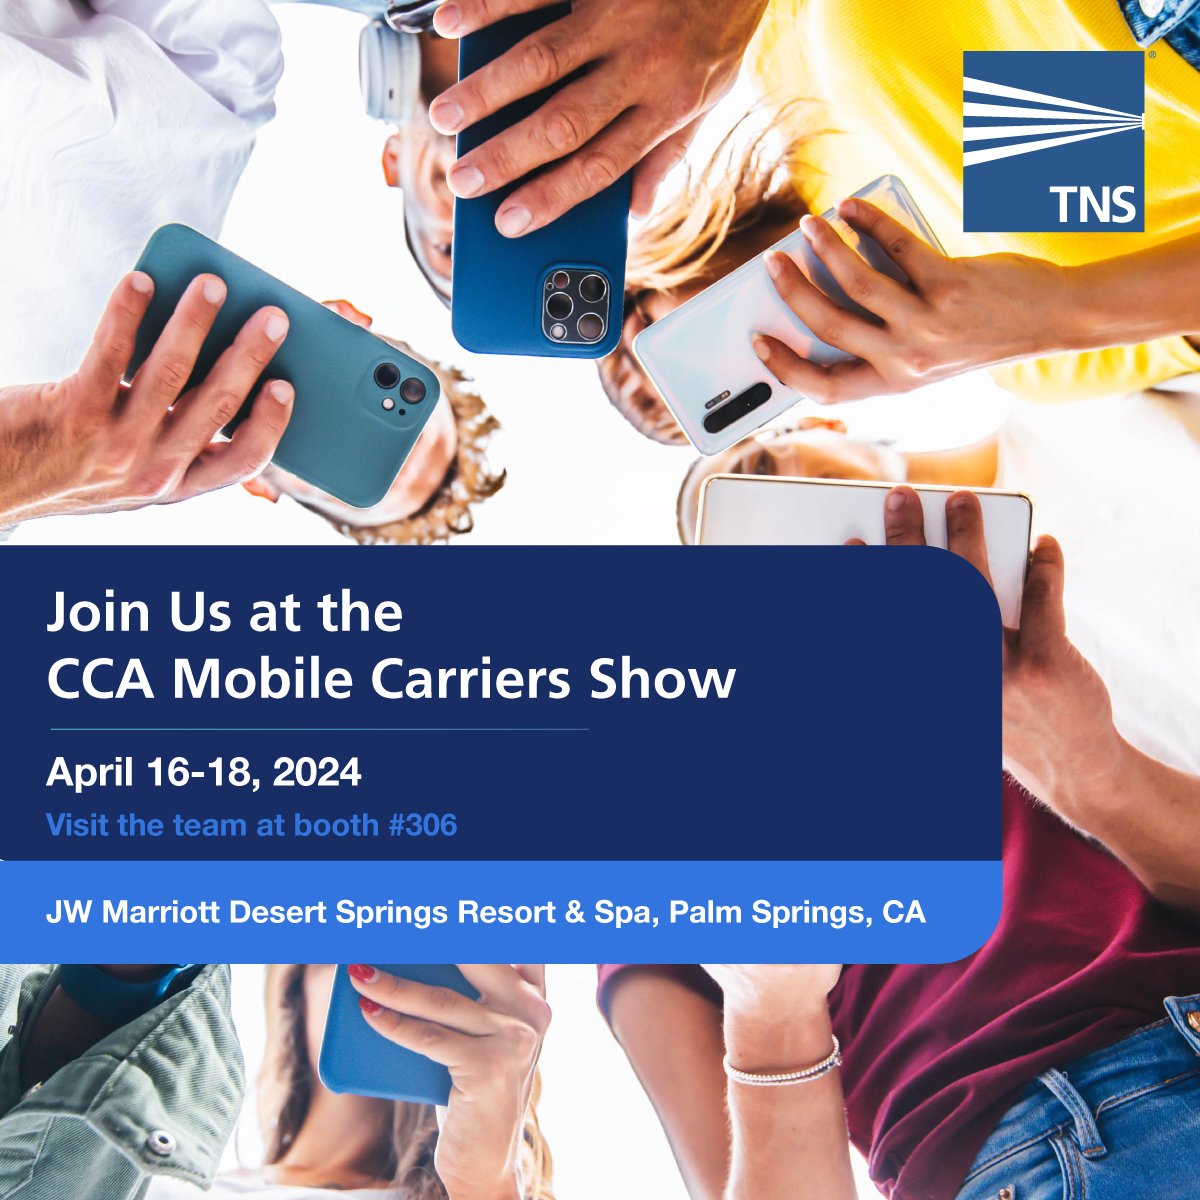 Join the TNS team at the upcoming @CCAmobile Mobile Carriers Show, April 16-18 in Palm Springs. Reach out to solutions@tnsi.com if you'd like to scheduled time to connect with the team. #Telecommunications #MCS2024